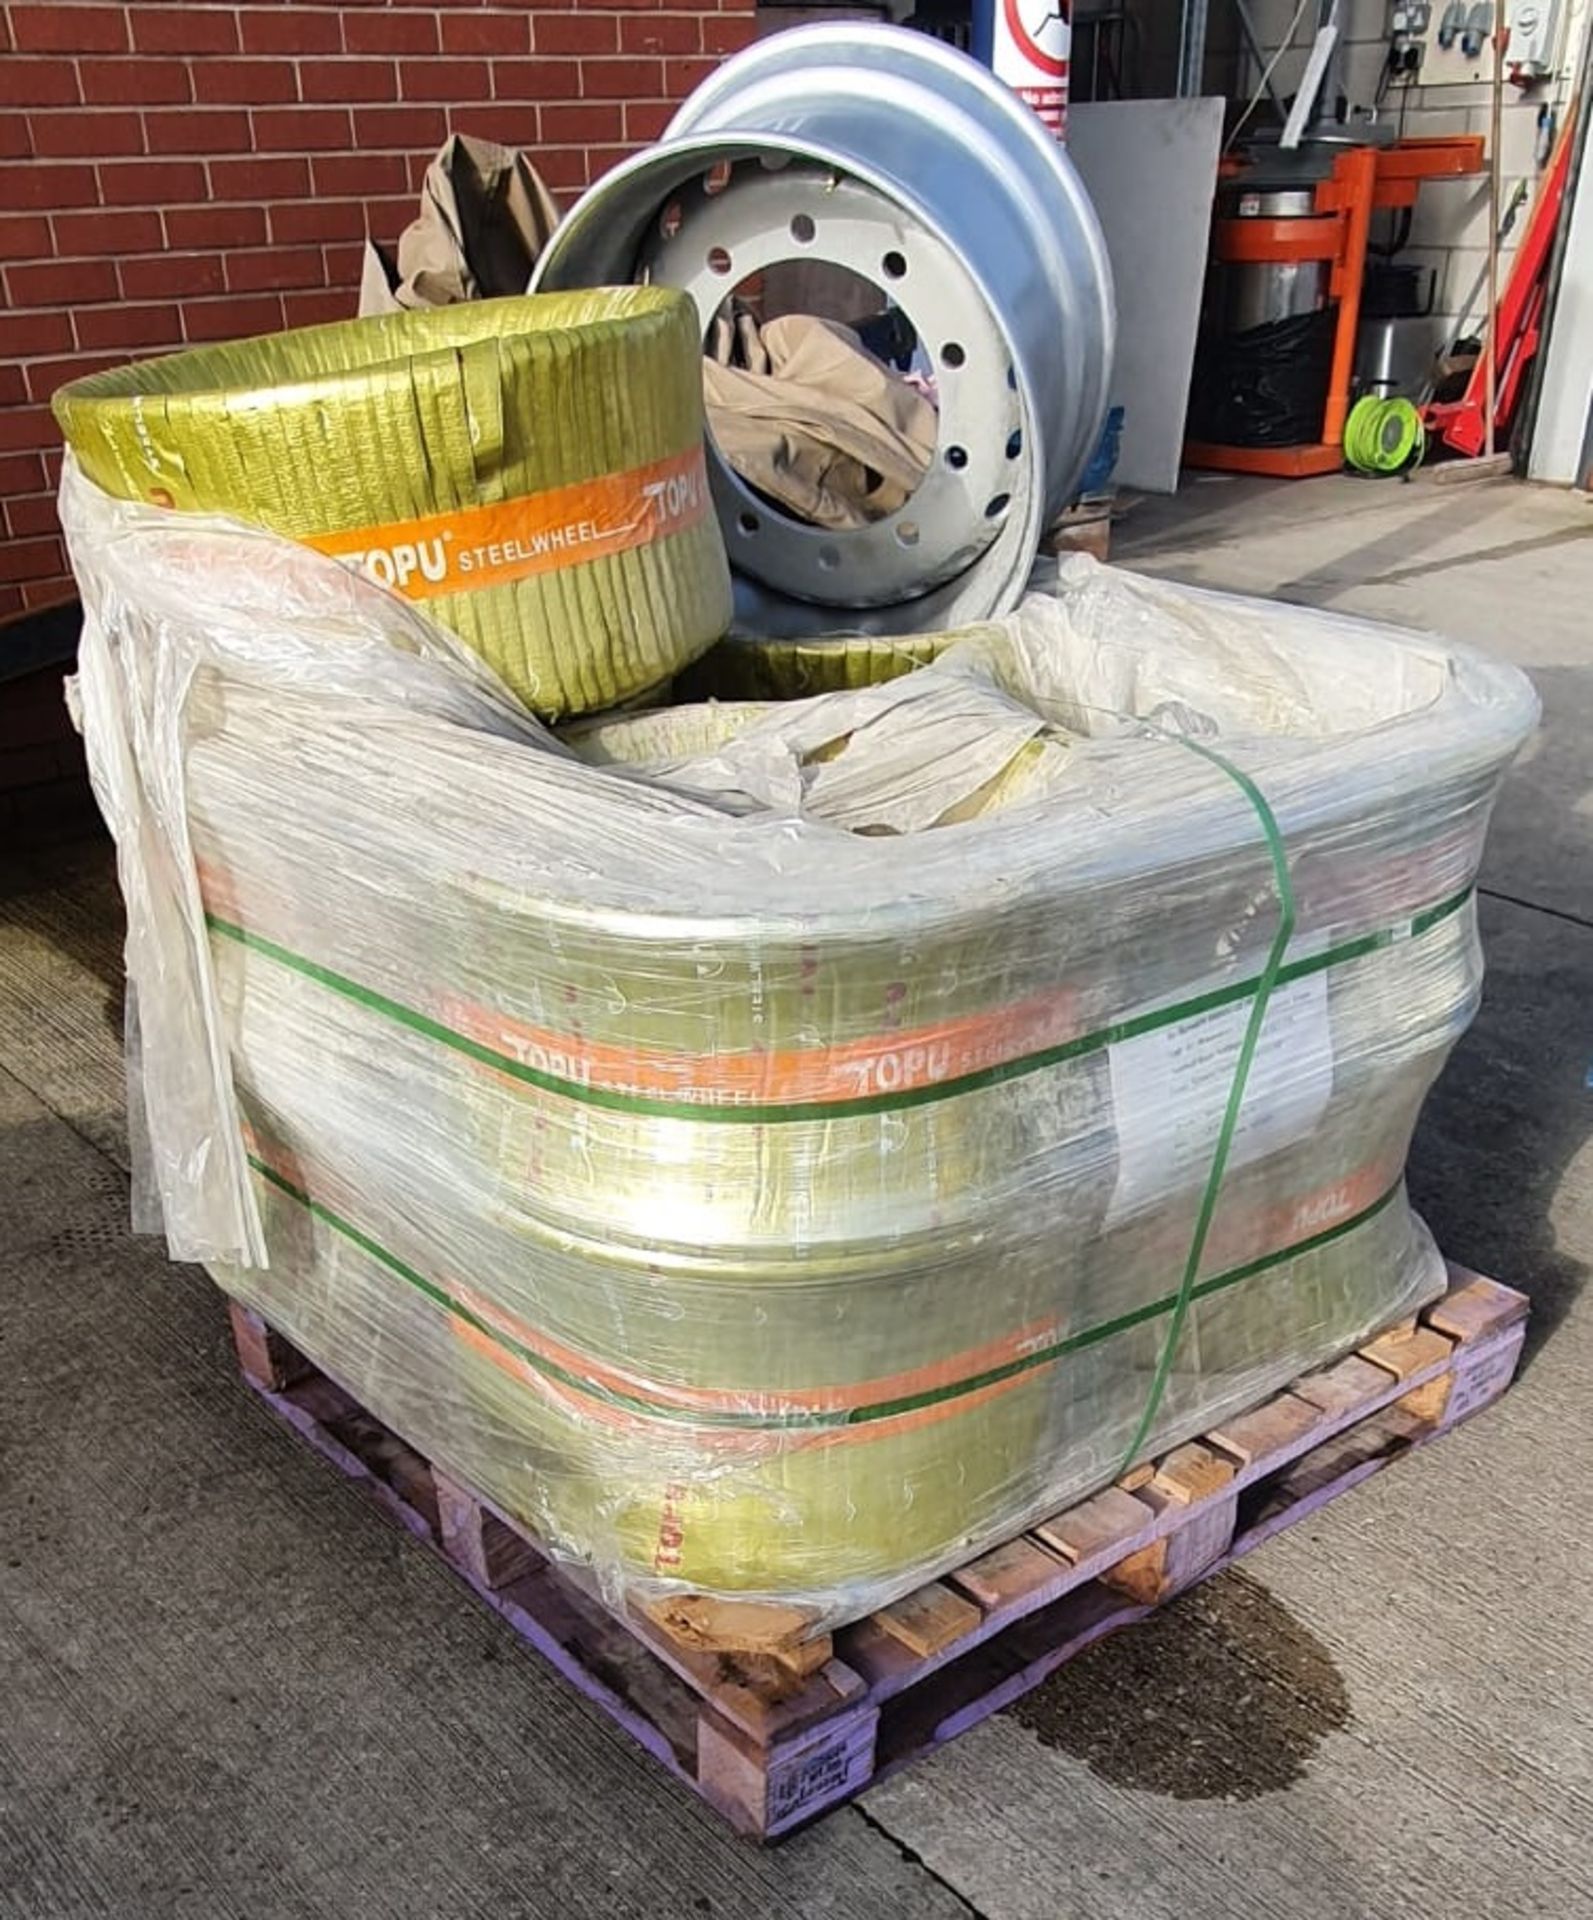 10 x TOPU Steel Truck Wheels - Unused Boxed Stock - Ref: HOC100 / WH2-SCT - CL987 - Location: - Image 2 of 3